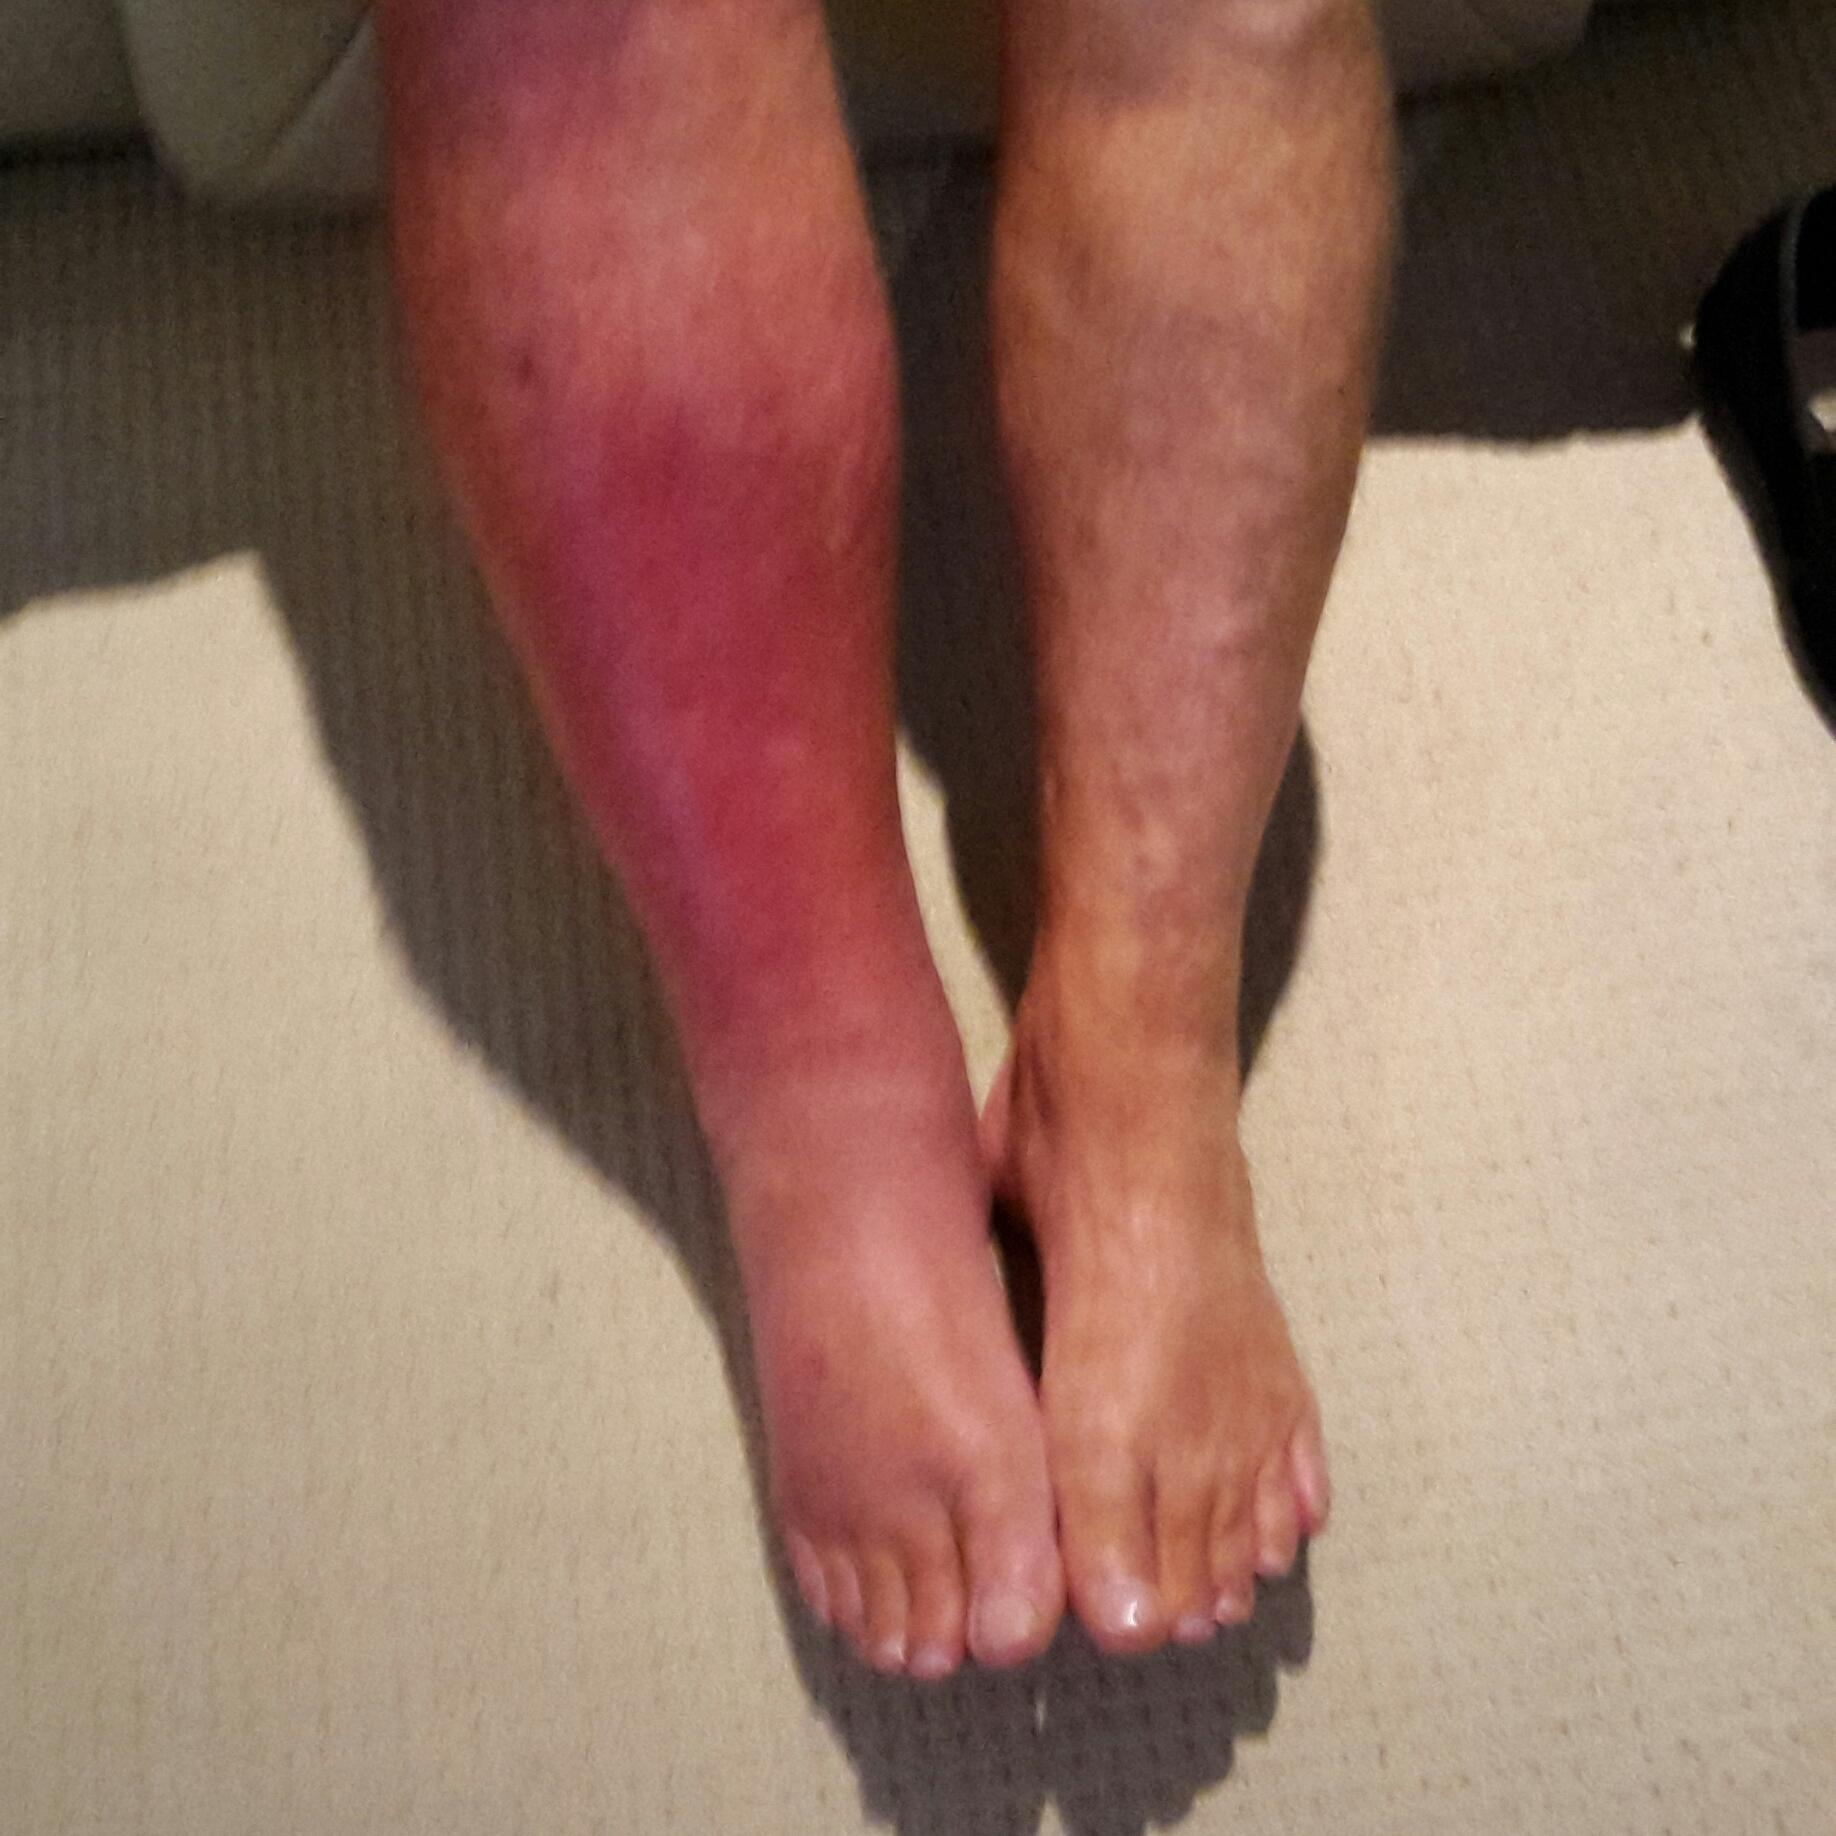 Collection 93+ Images pictures of cellulitis on legs Updated